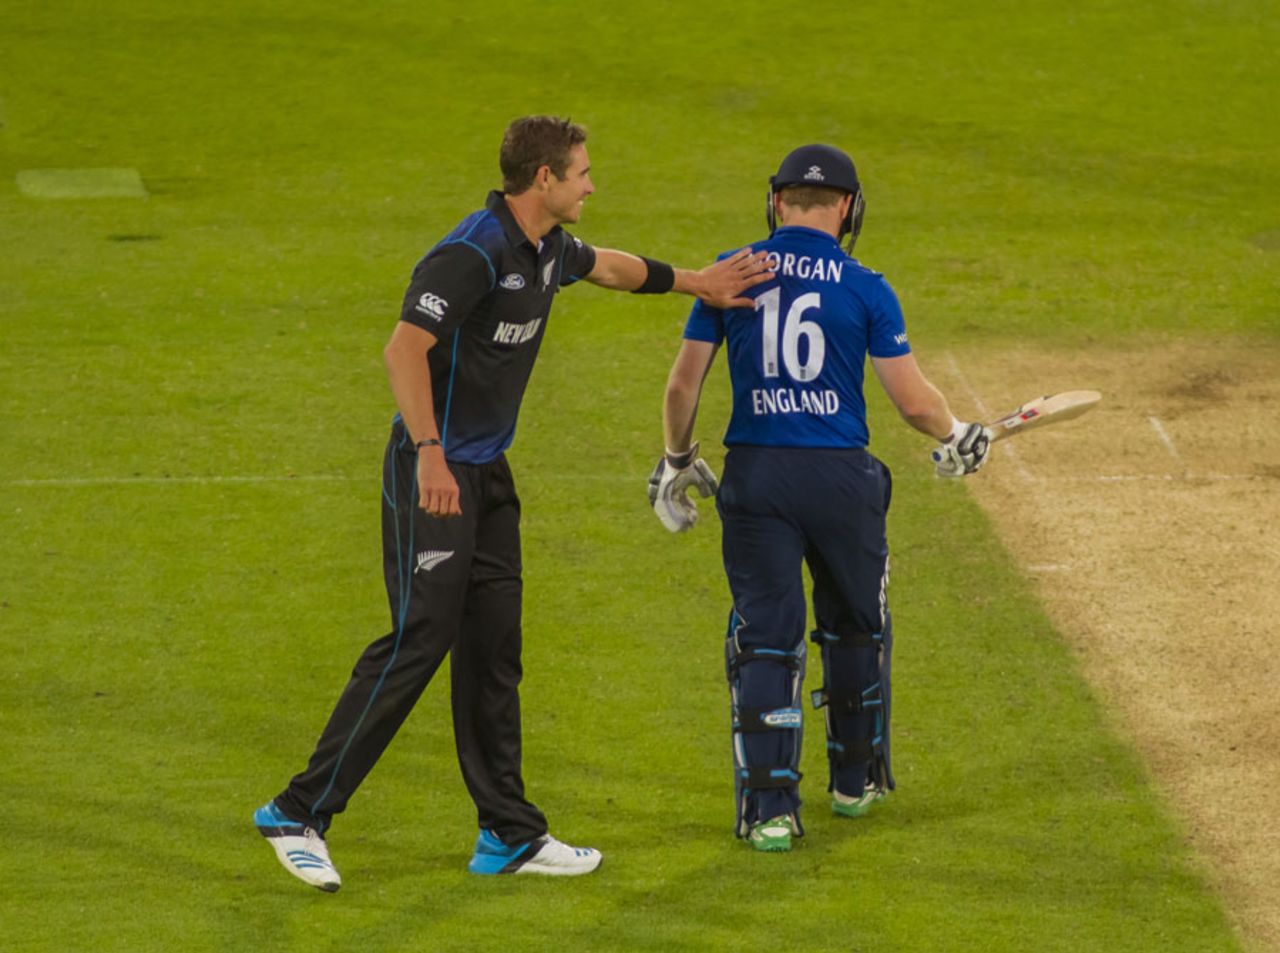 Tim Southee eventually removed Eoin Morgan for 113, England v New Zealand, 4th ODI, Trent Bridge, June 17, 2015